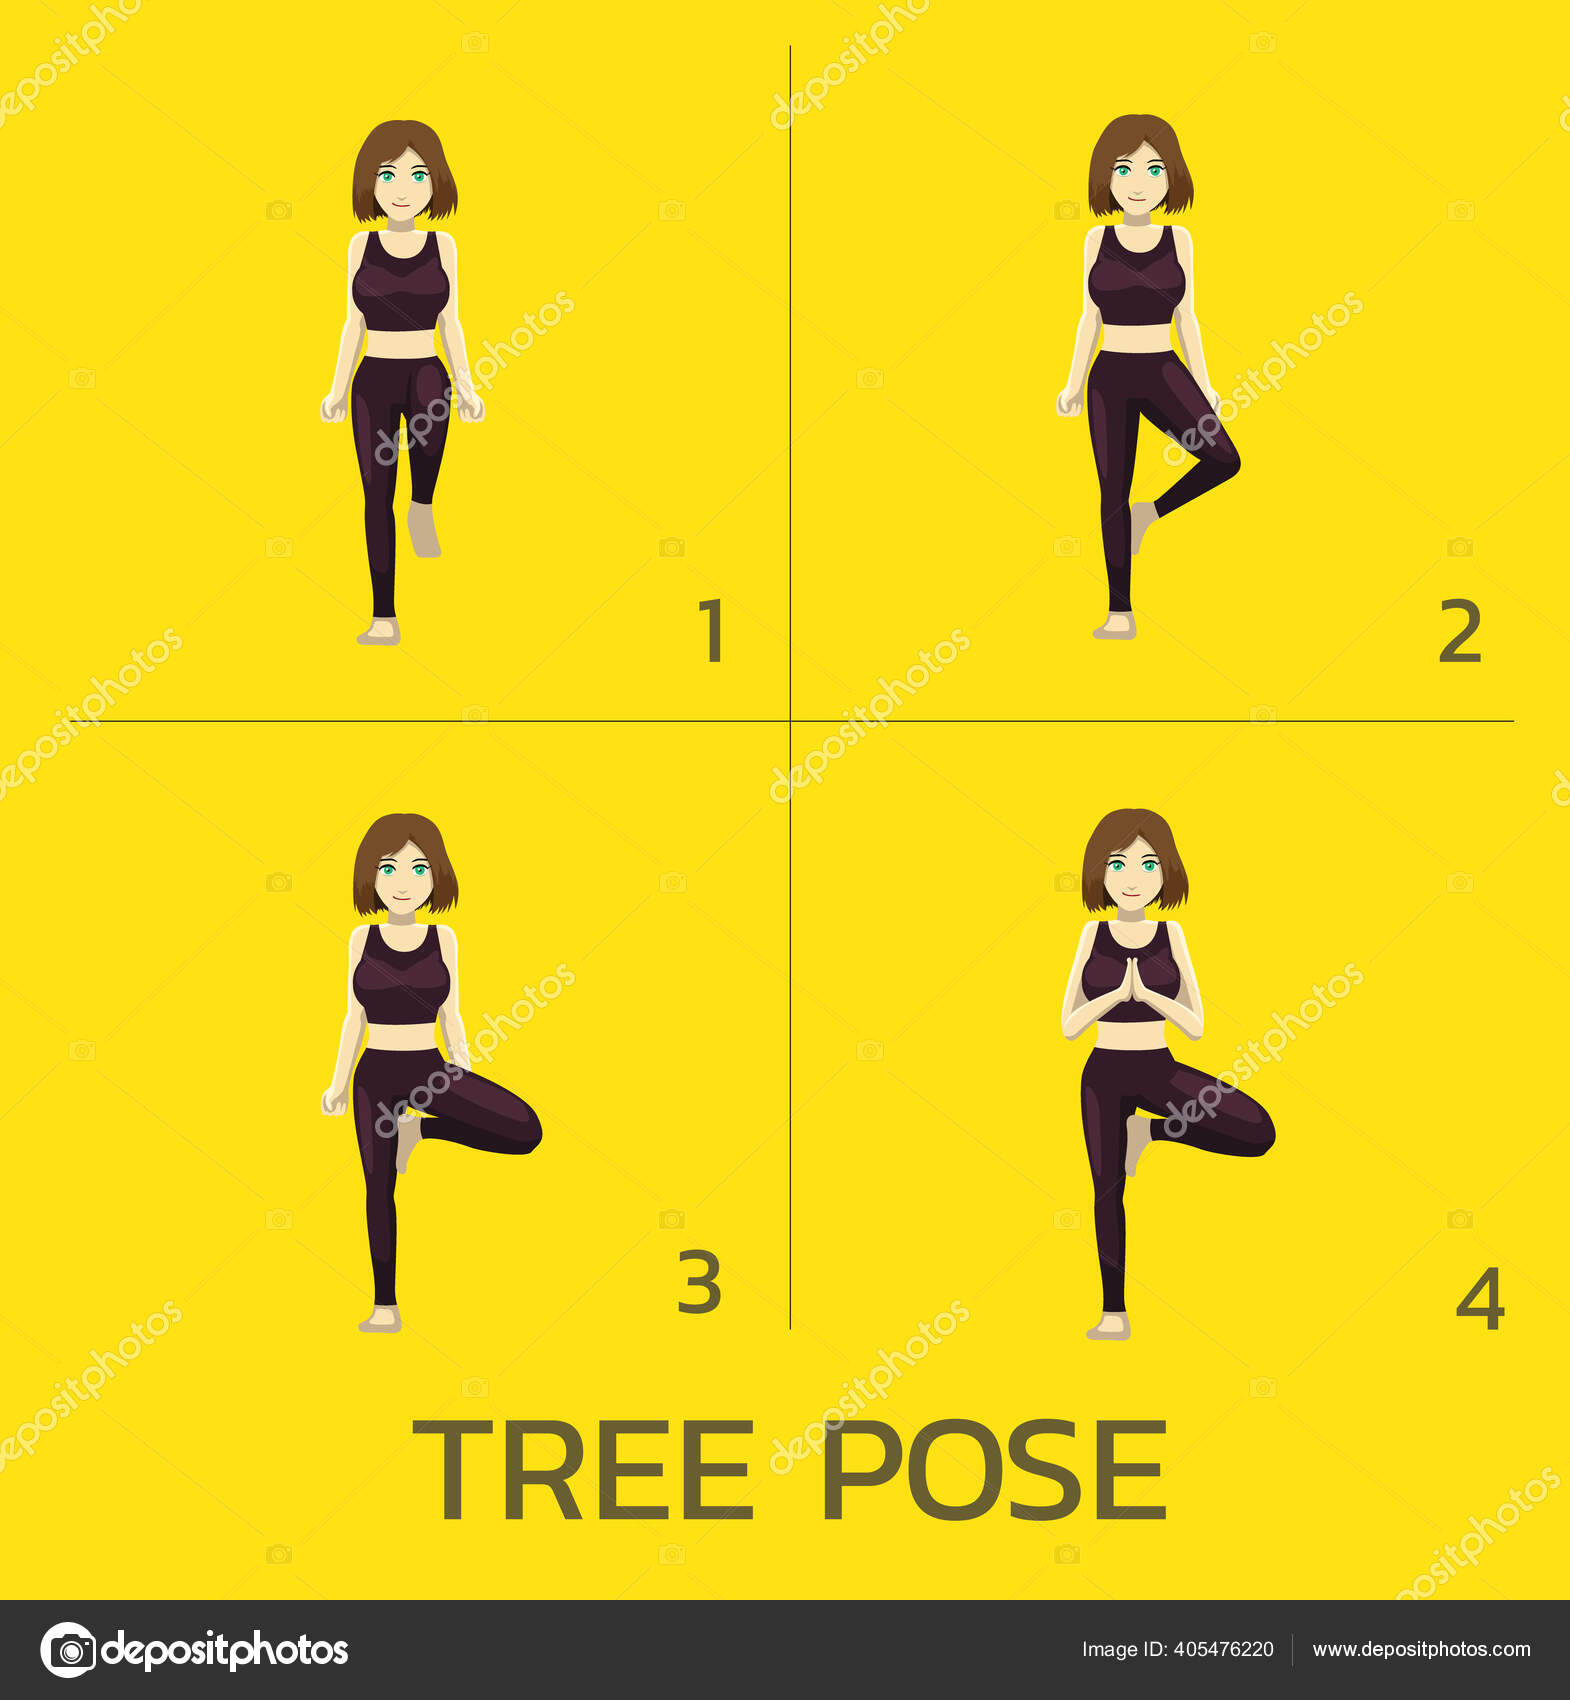 Tree pose Stock Photos and Images. 62,145 Tree pose pictures and royalty  free photography available to search from thousands of stock photographers.